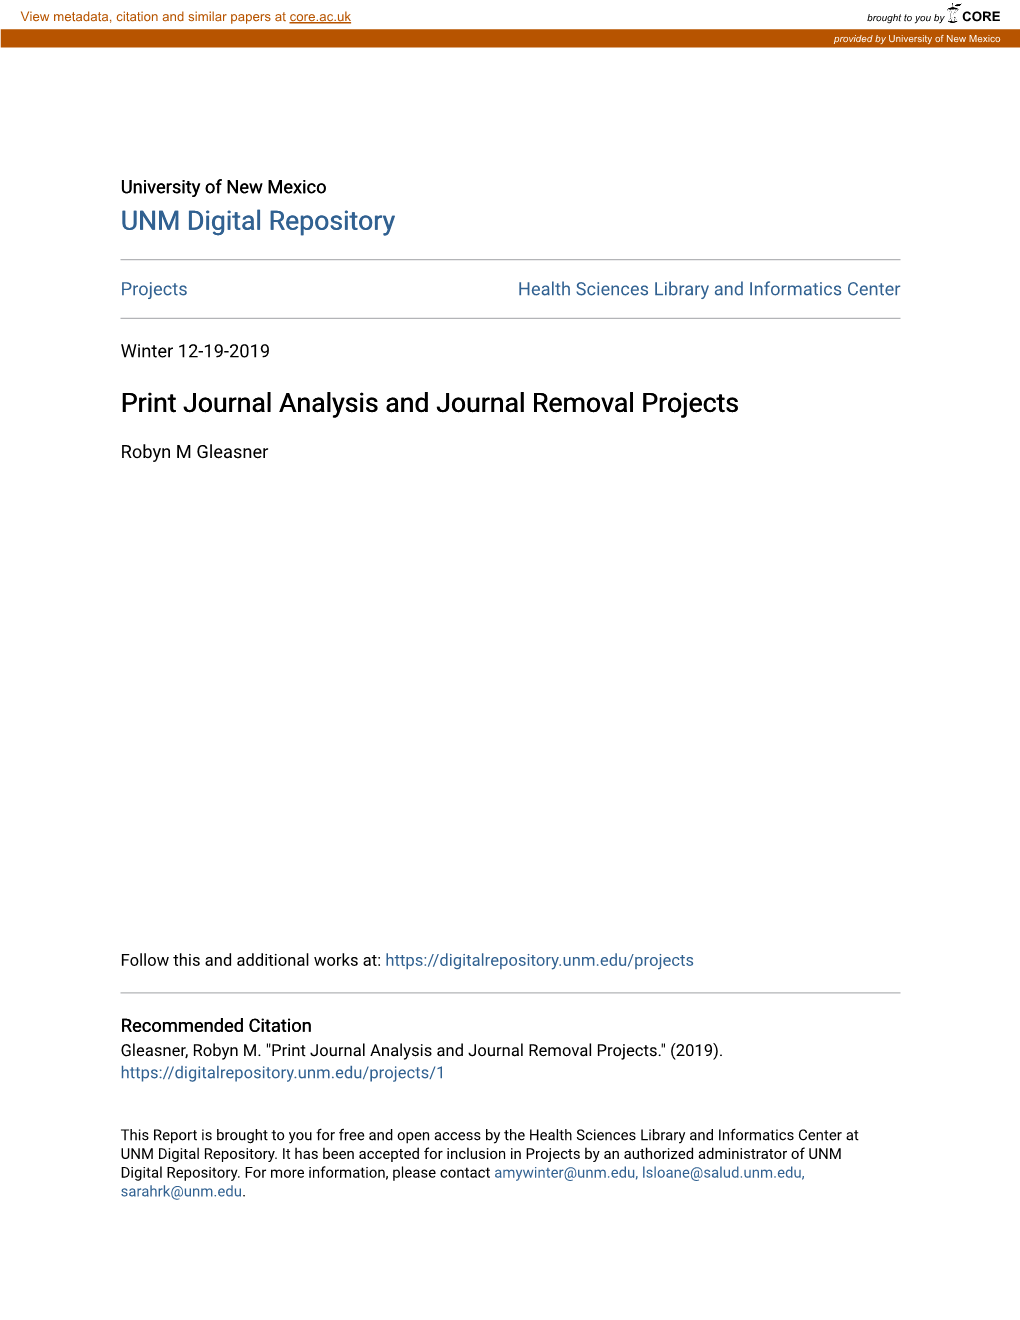 Print Journal Analysis and Journal Removal Projects